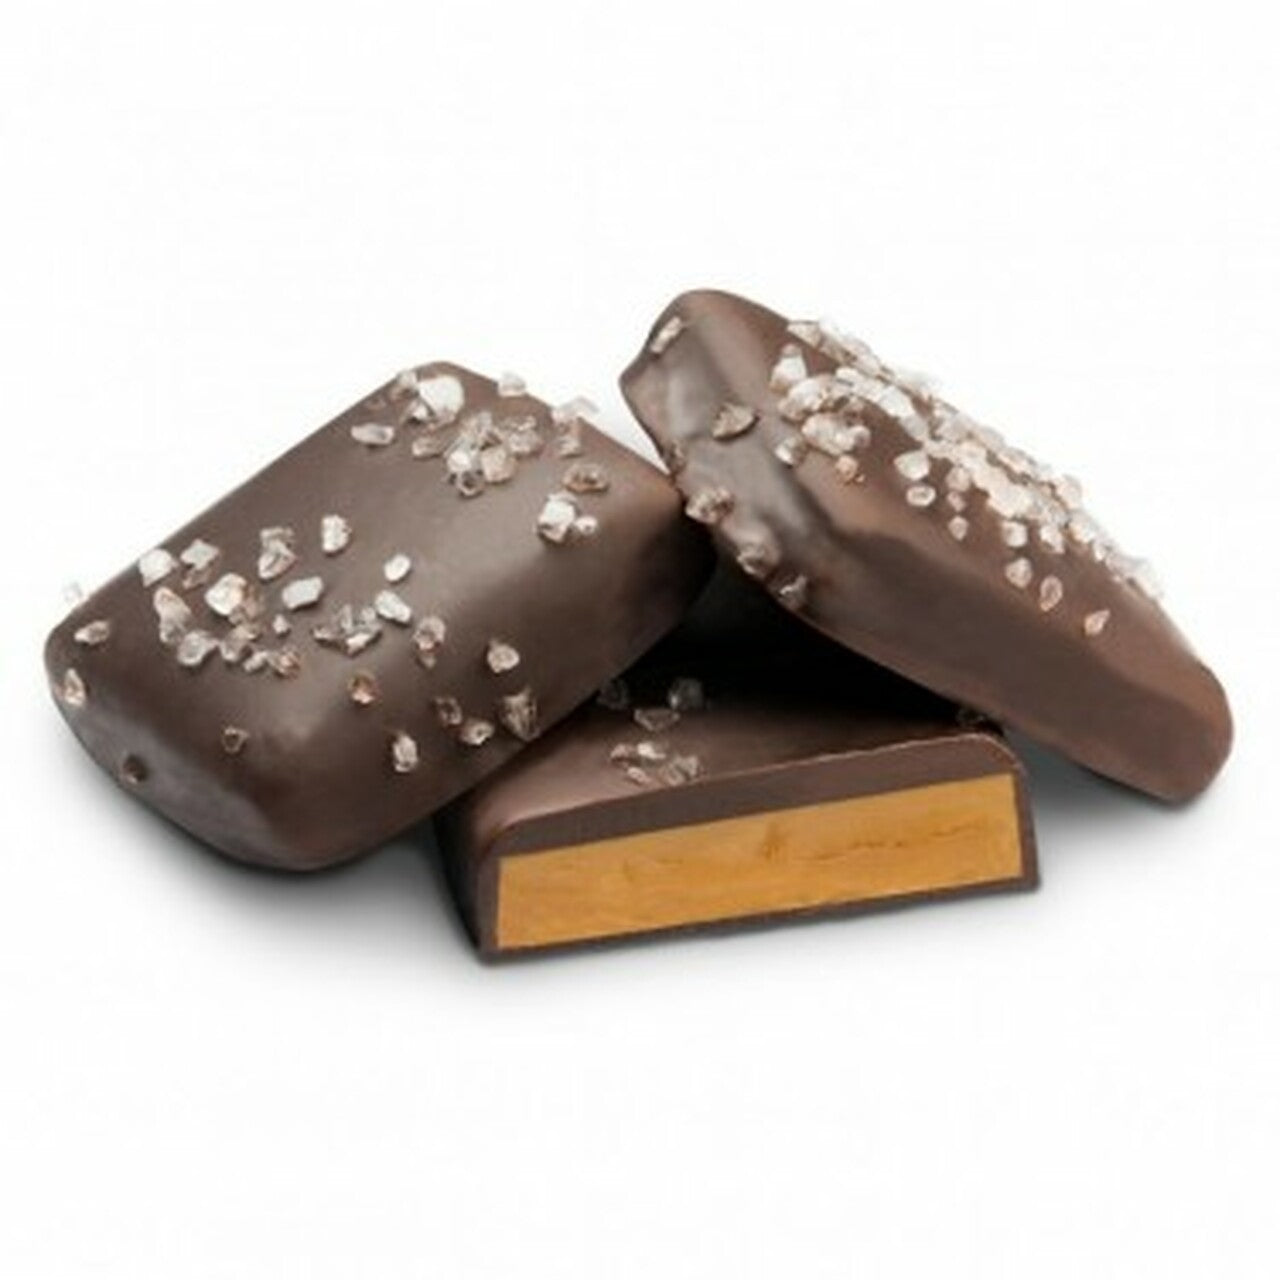 Dark chocolate English Toffee with sea salt from Stage Stop Candy